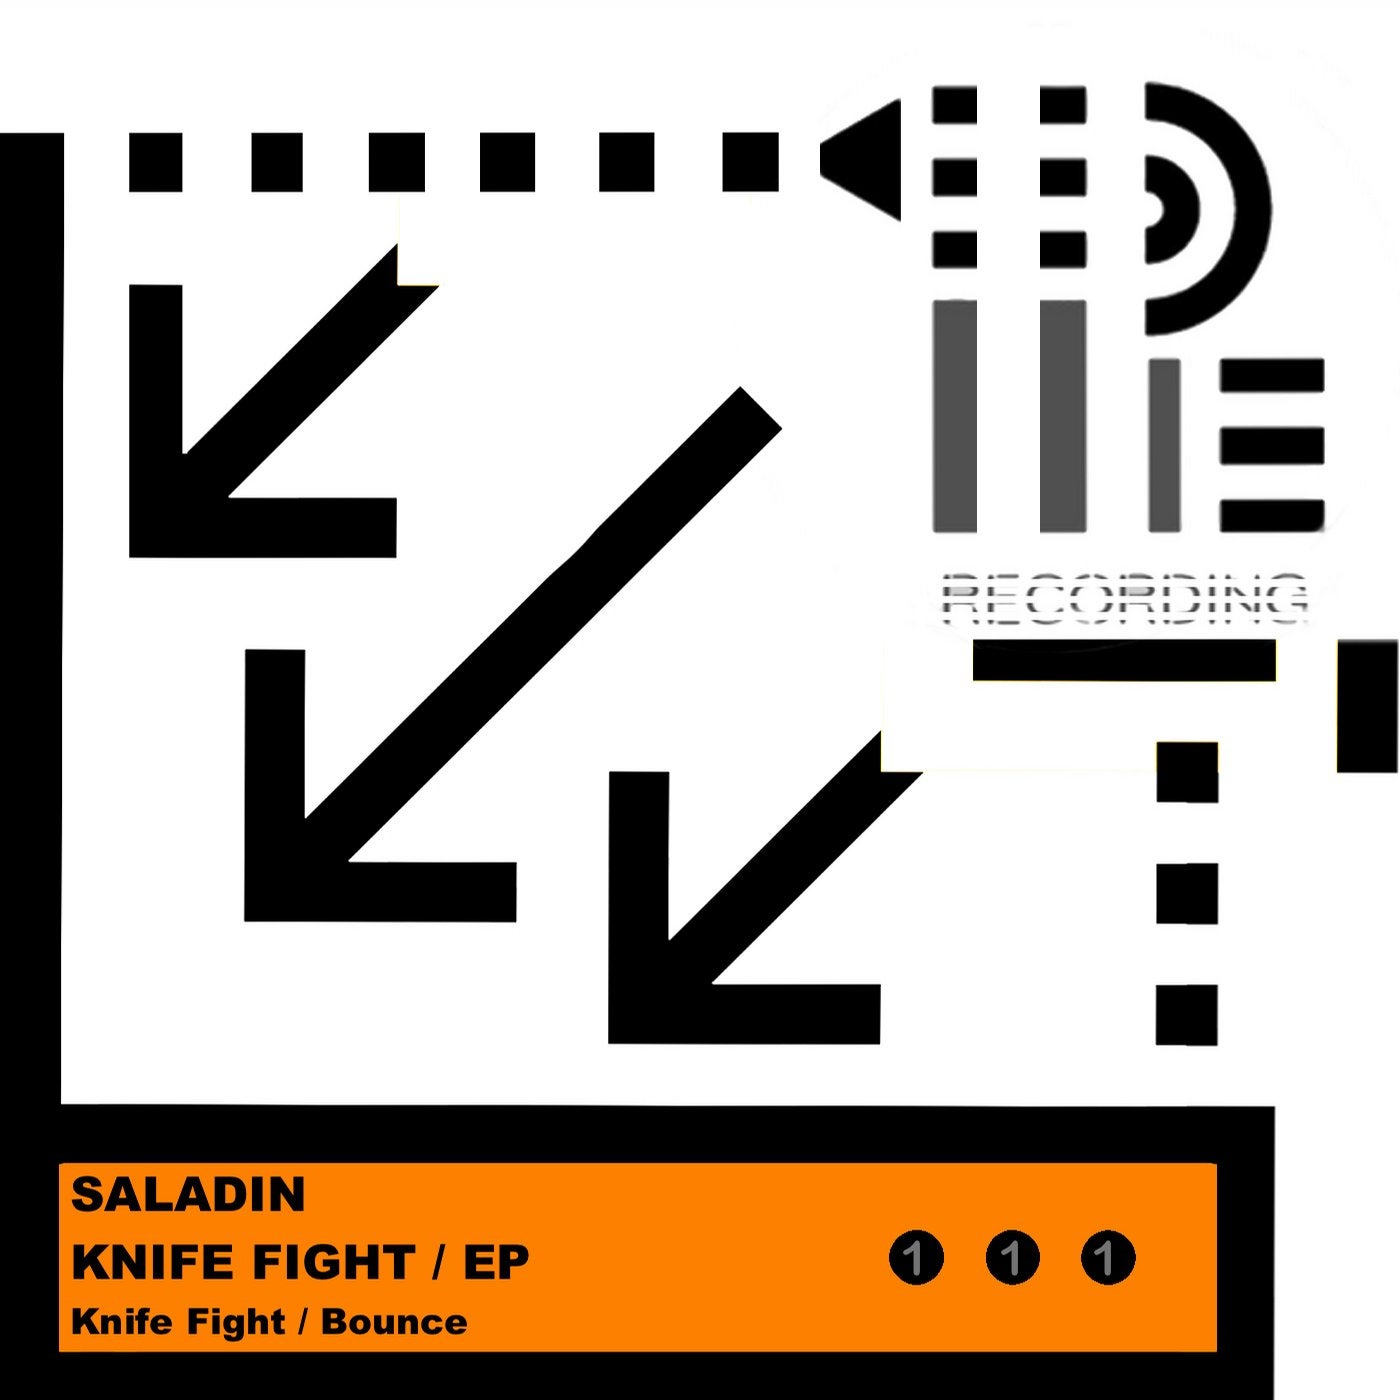 KNIFE FIGHT / EP